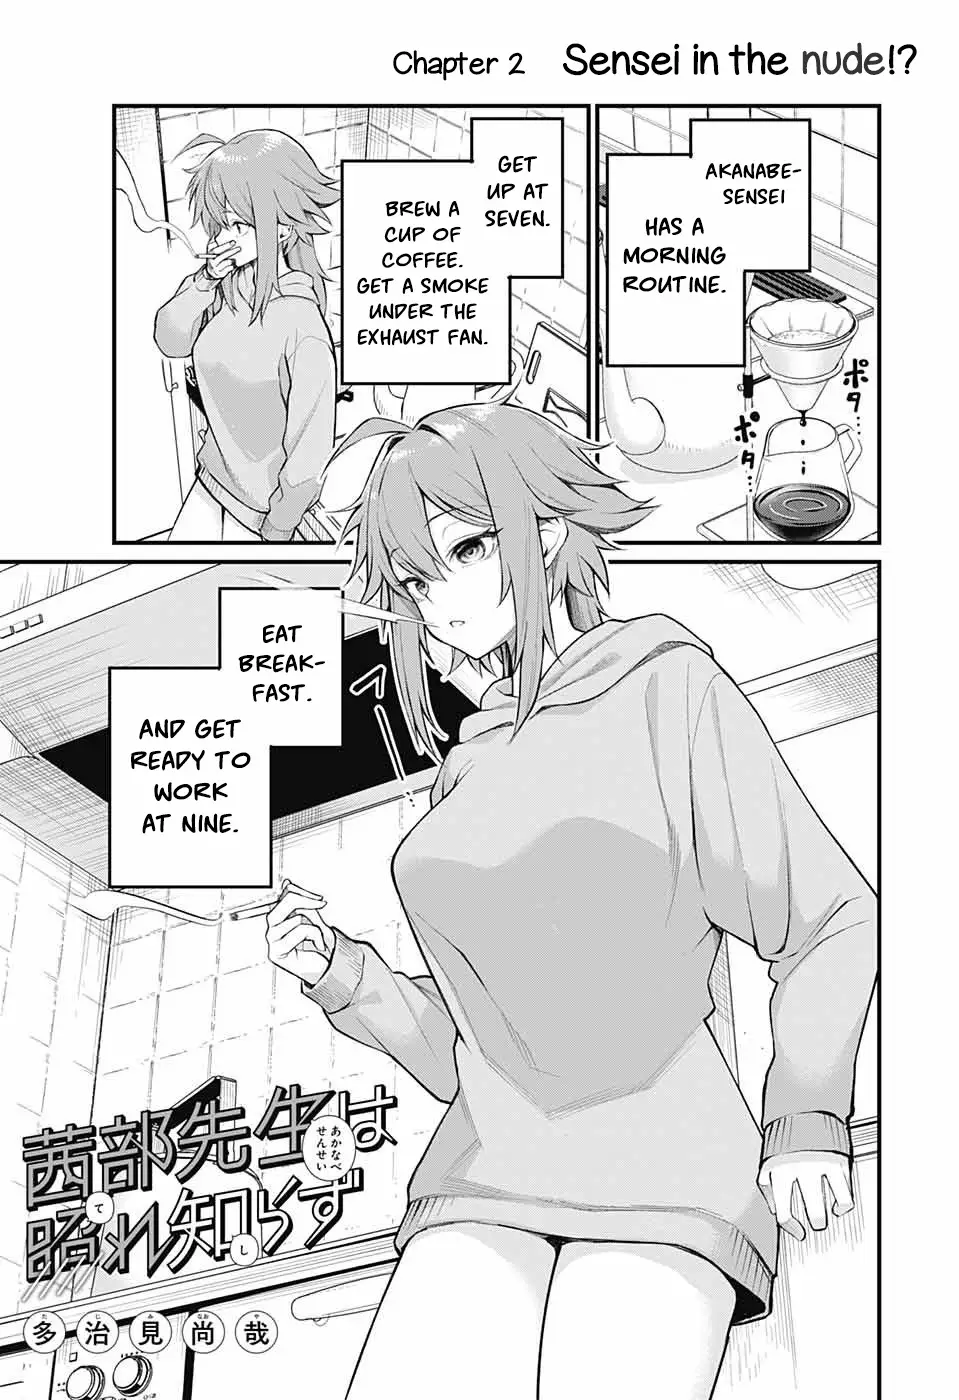 Akanabe-Sensei Doesn't Know About Embarrassment - 2 page 1-012d7242